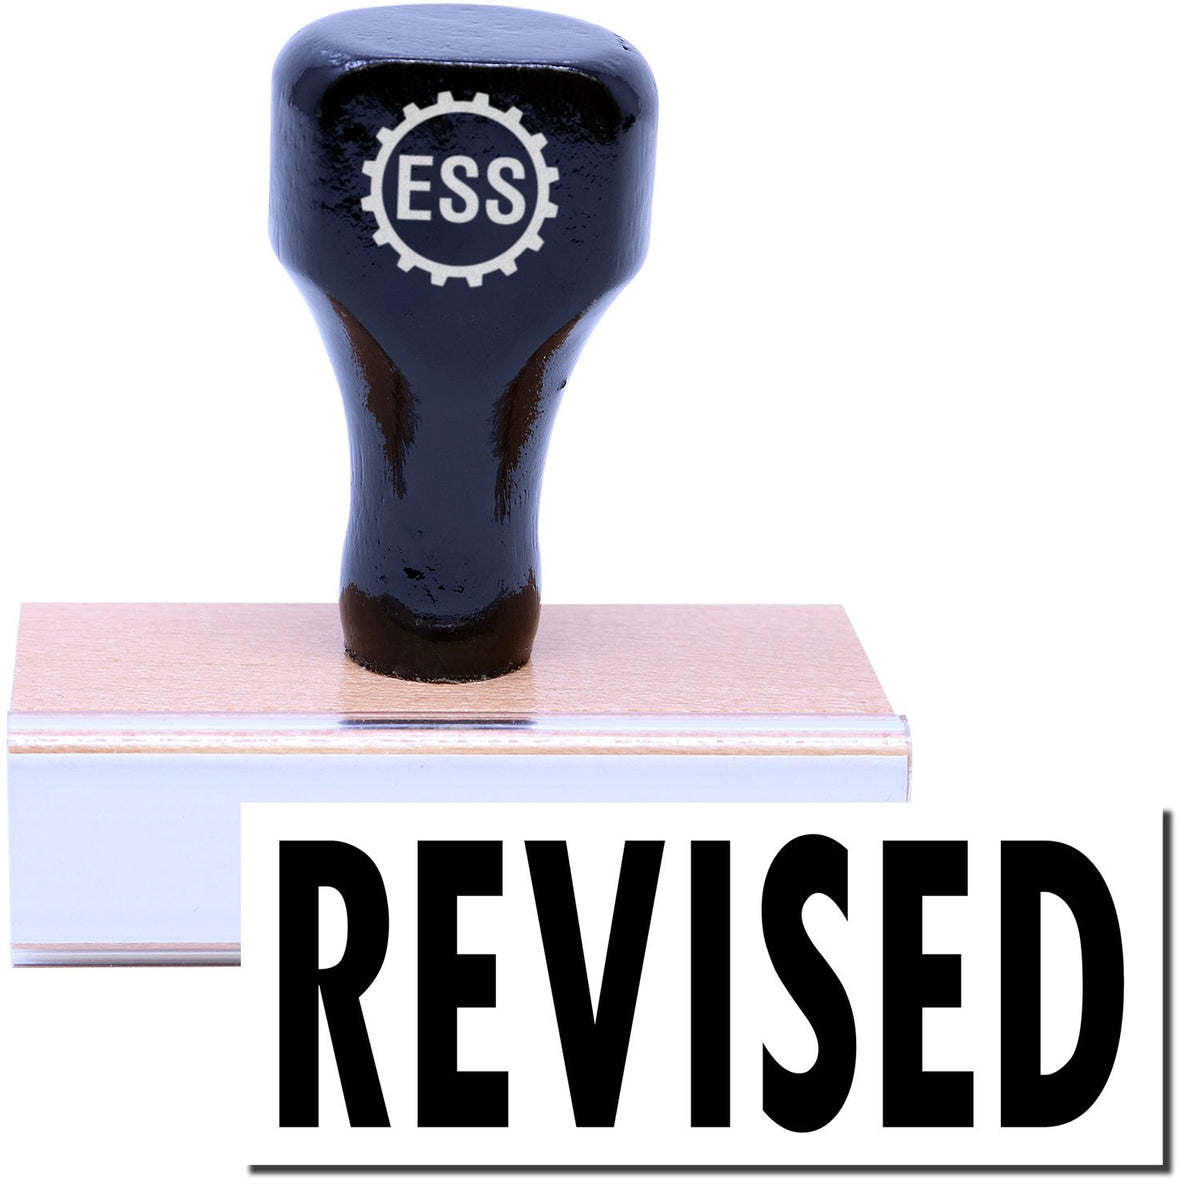 A stock office rubber stamp with a stamped image showing how the text &quot;REVISED&quot; is displayed after stamping.